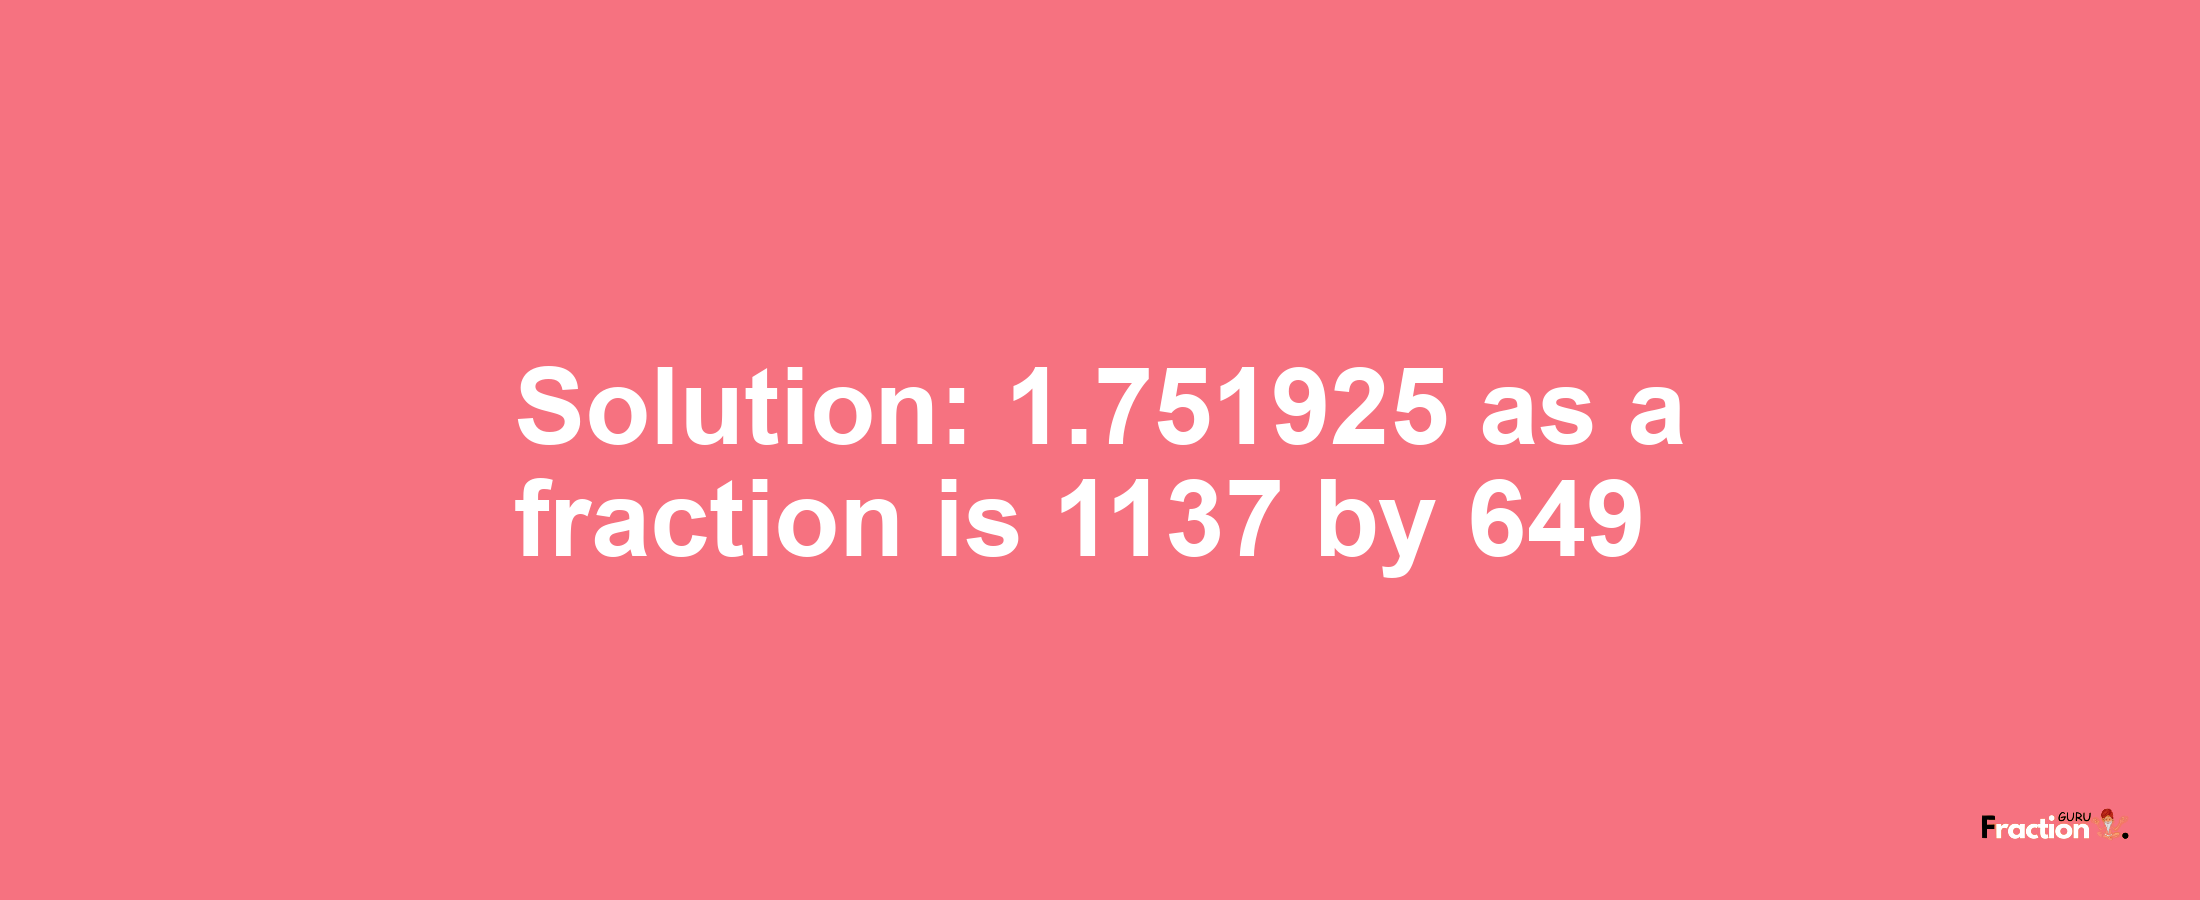 Solution:1.751925 as a fraction is 1137/649